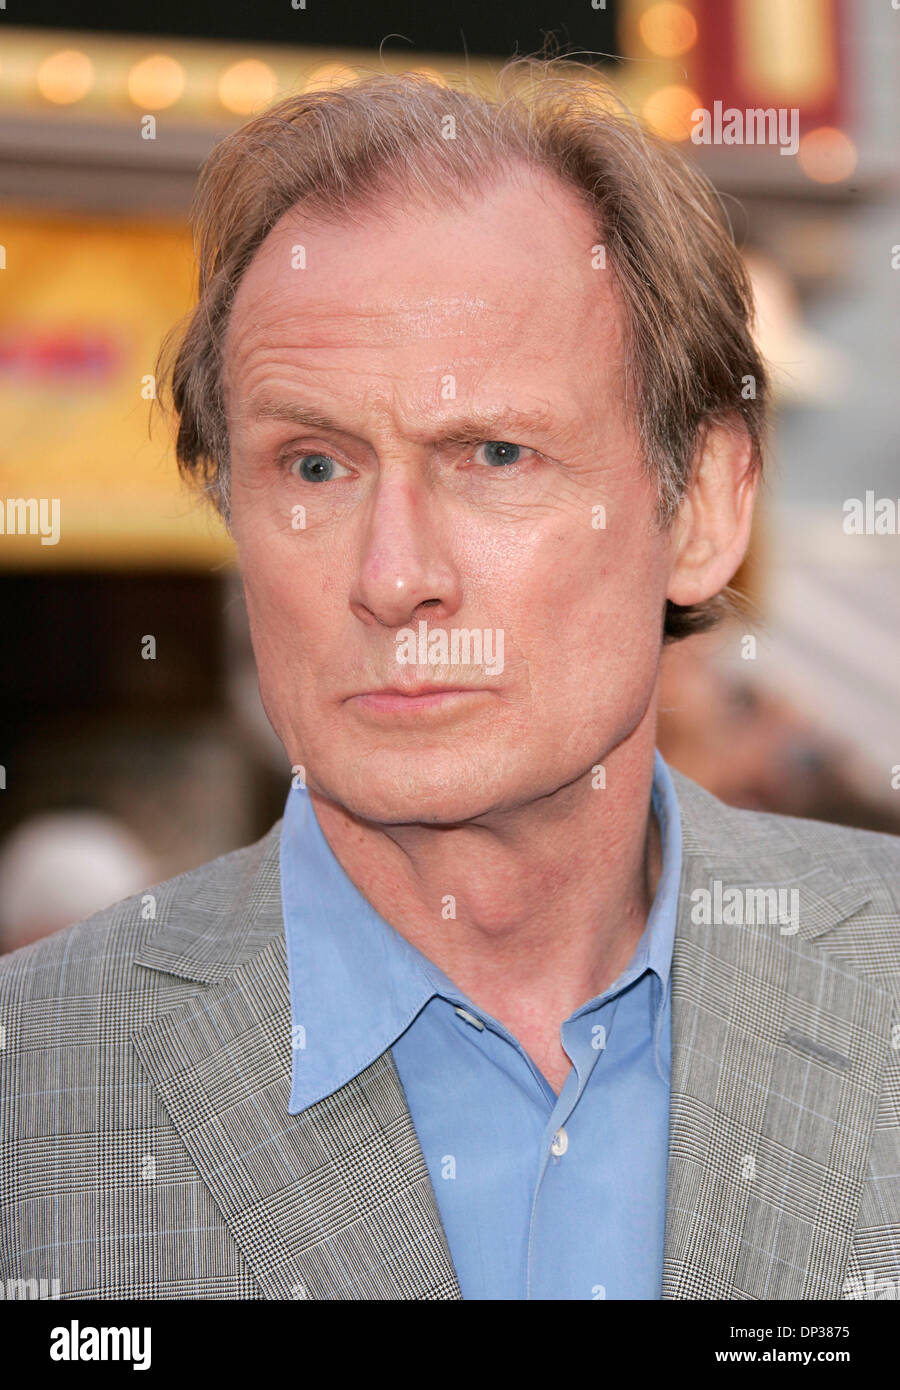 Jun 24, 2006; Anaheim, California, USA; Actor BILL NIGHY at the 'Pirates Of The Caribbean: Dead Man's Chest' World Premiere held at Disneyland. Mandatory Credit: Photo by Lisa O'Connor/ZUMA Press. (©) Copyright 2006 by Lisa O'Connor Stock Photo